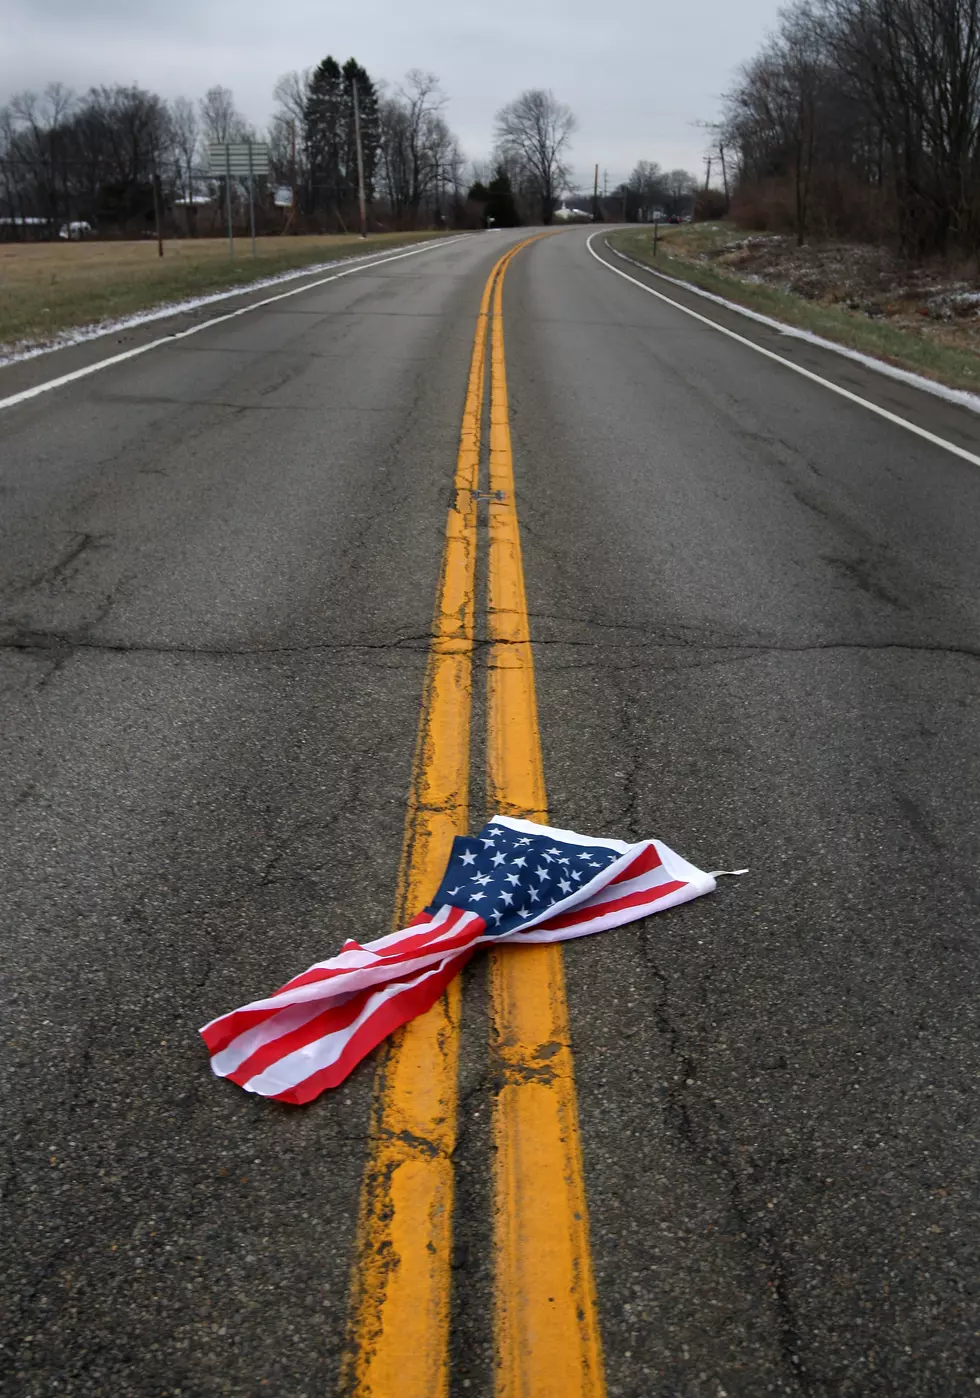 Is This Your Flag I Found On The Road @ 40th &#038; Lincoln?